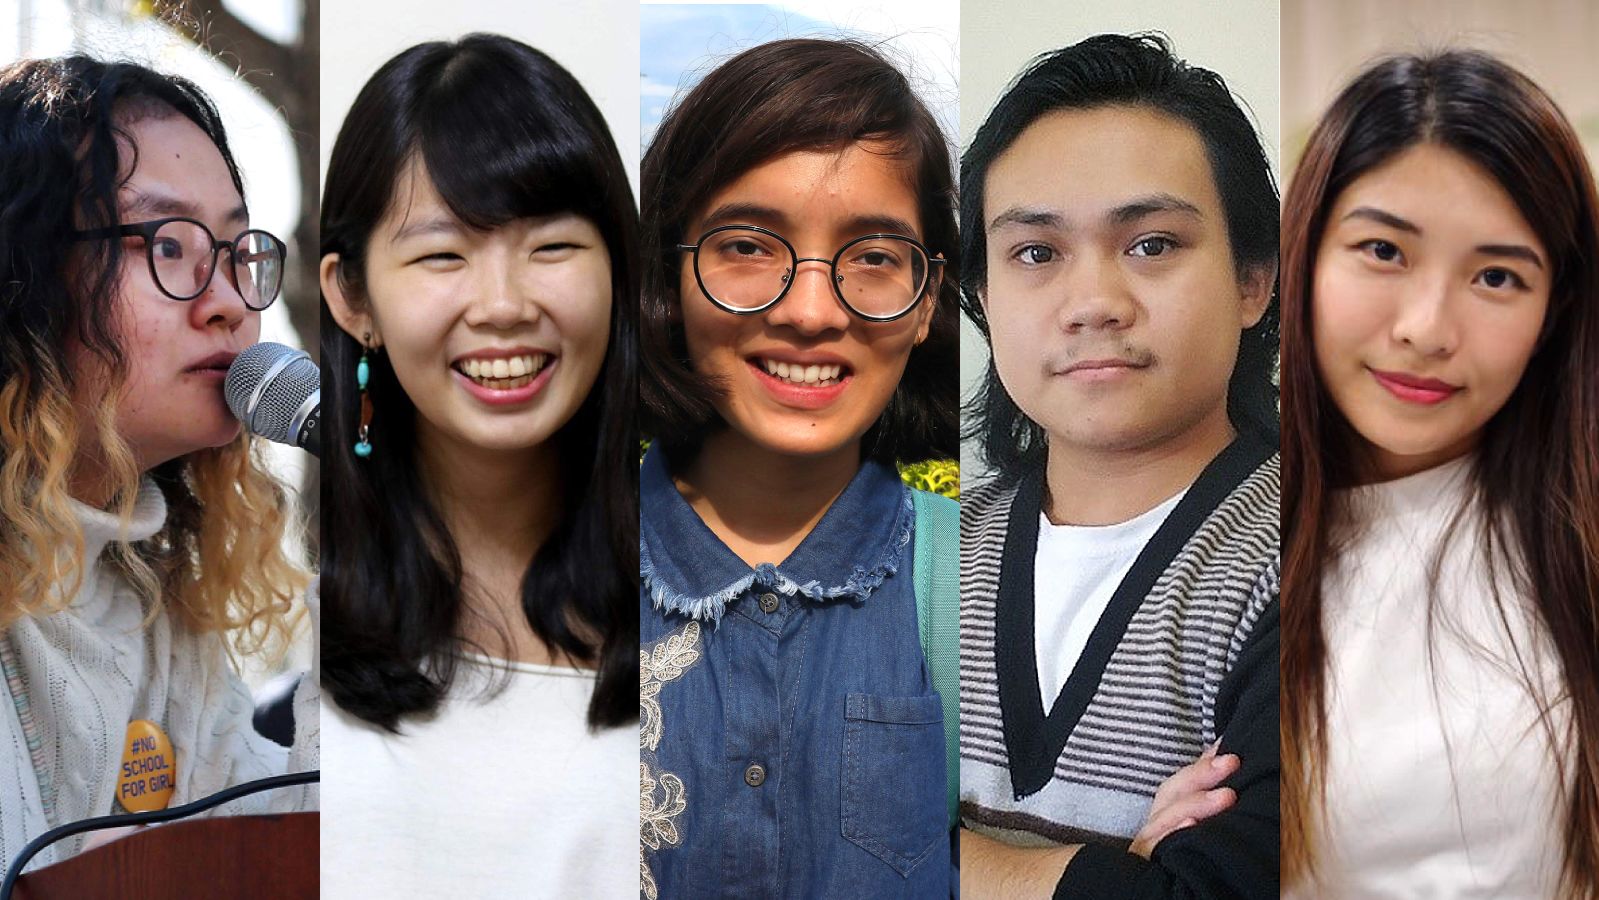 Young people across Asia pushed for change in 2019. Meet five of them | CNN